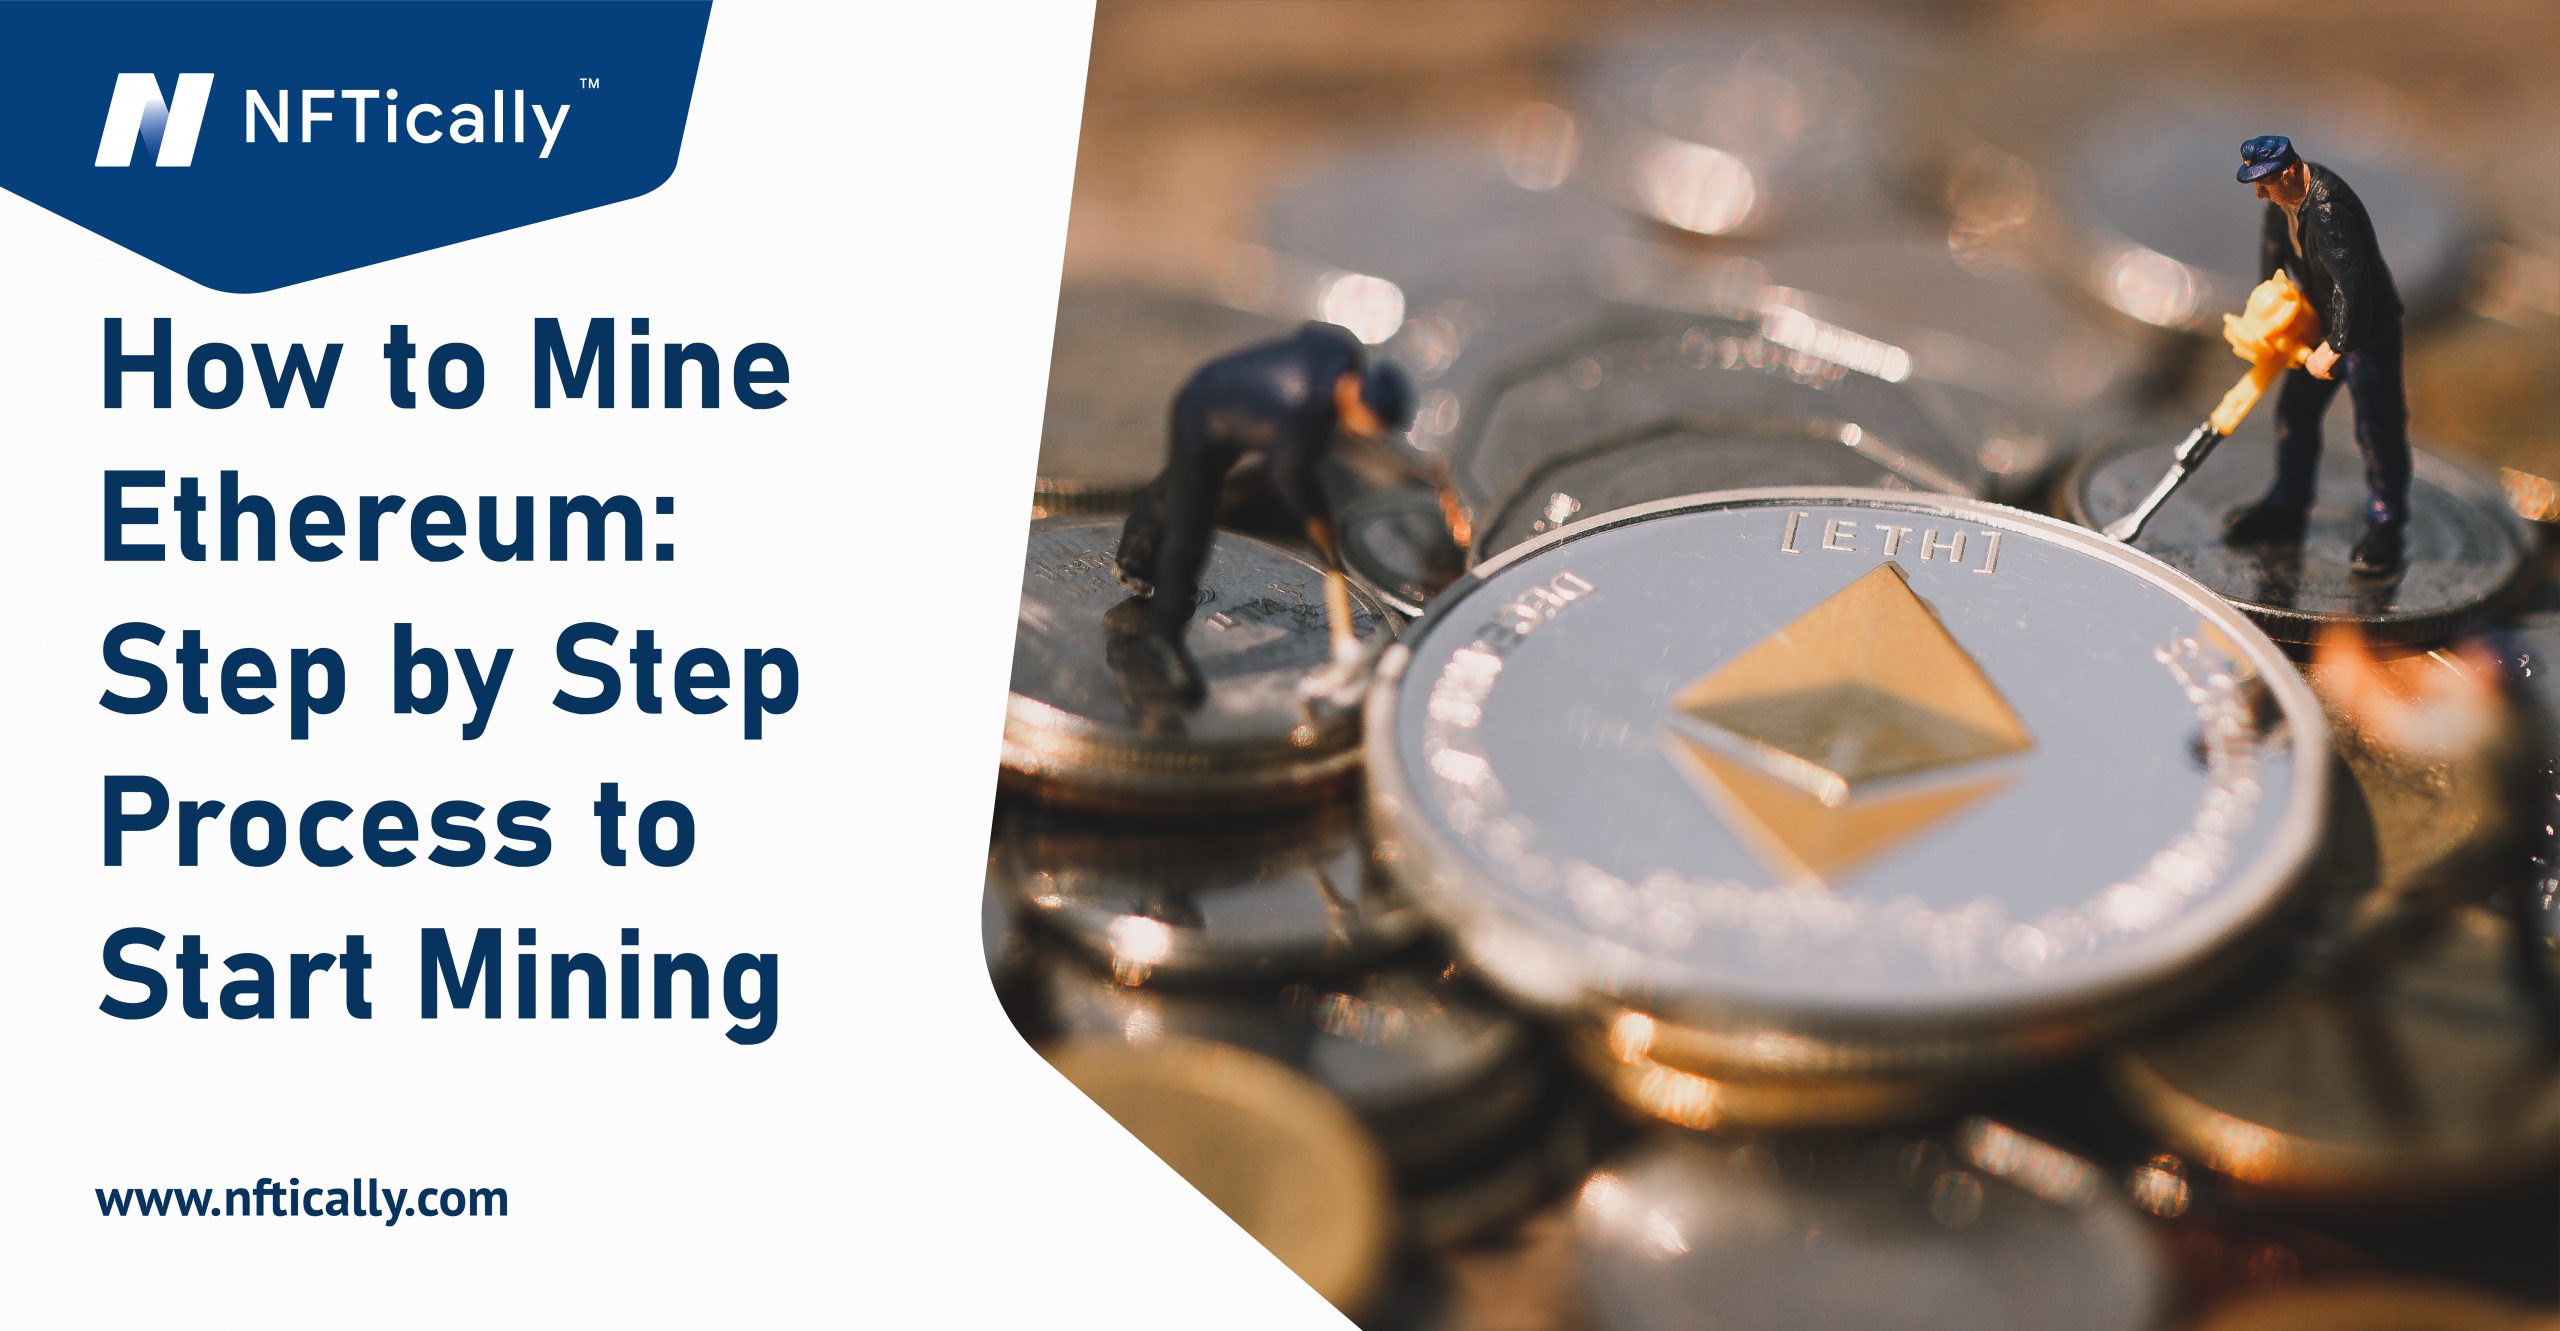 How to Mine Ethereum: Step by Step Process to Start Mining